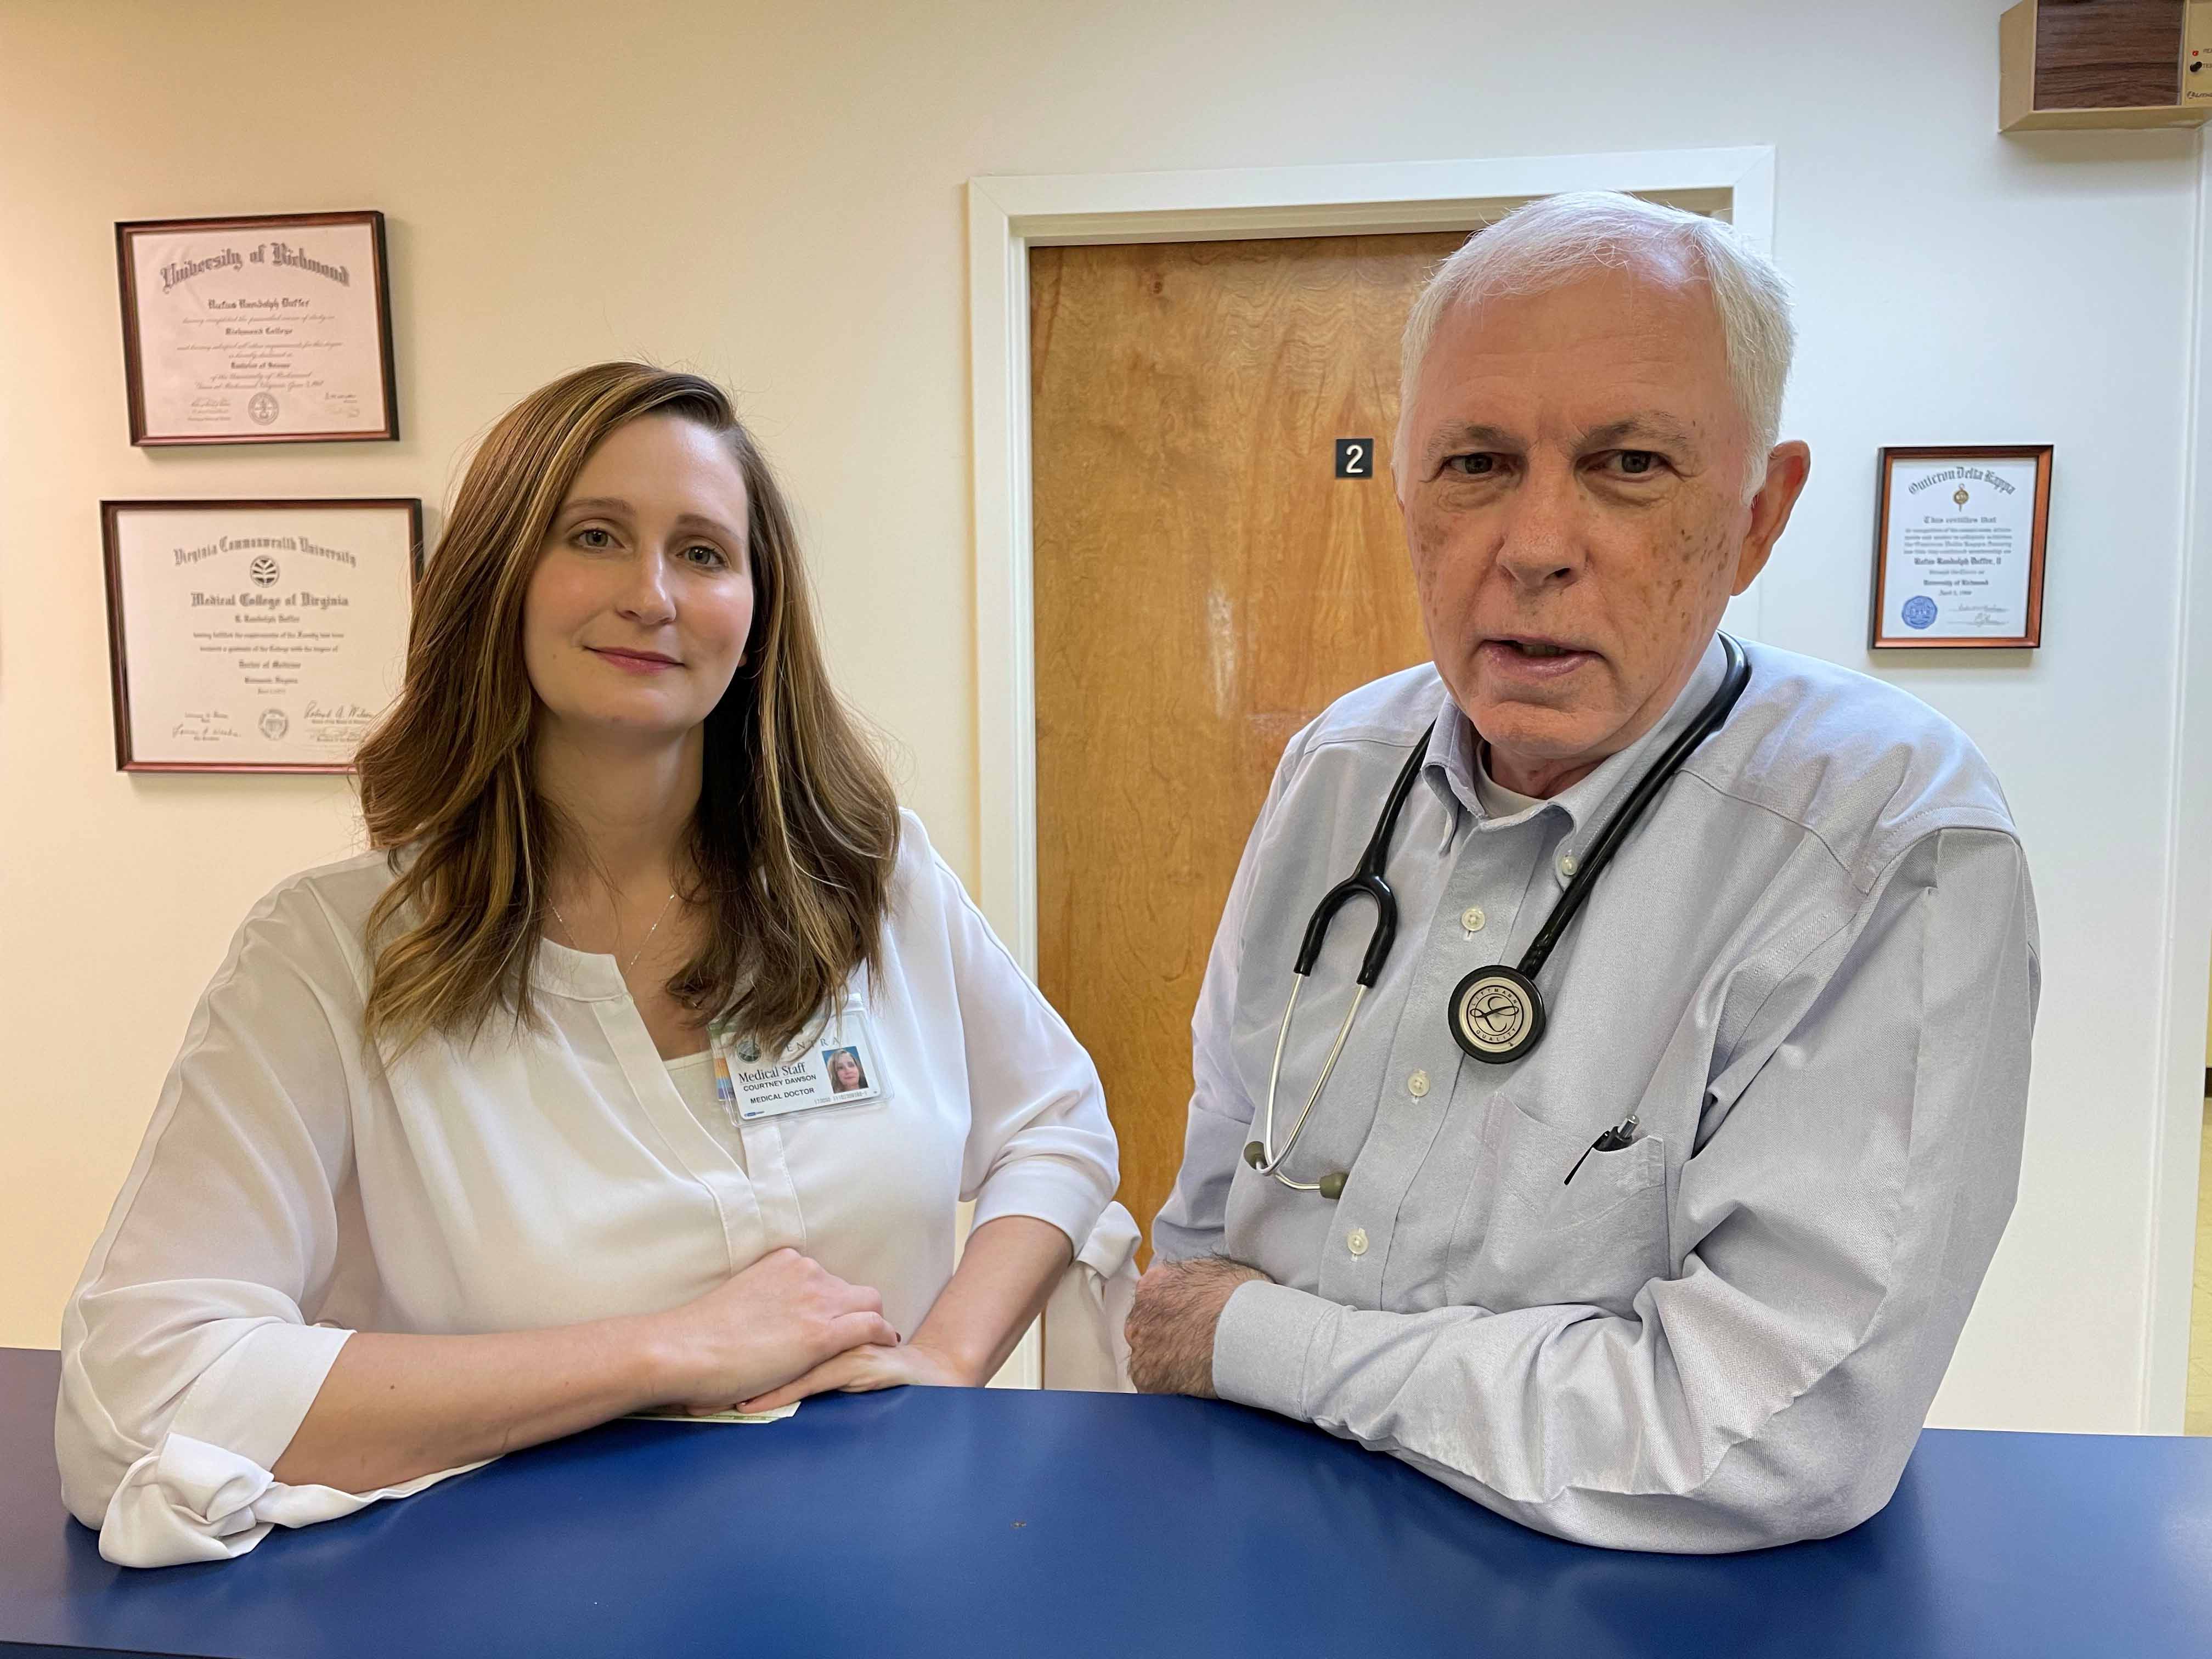 Courtney Dawson, M'18, and Randolph Duffer, M'72, H'75, stand side-by-sde at the reception desk of his rural family practice in Gretna, Virginia.